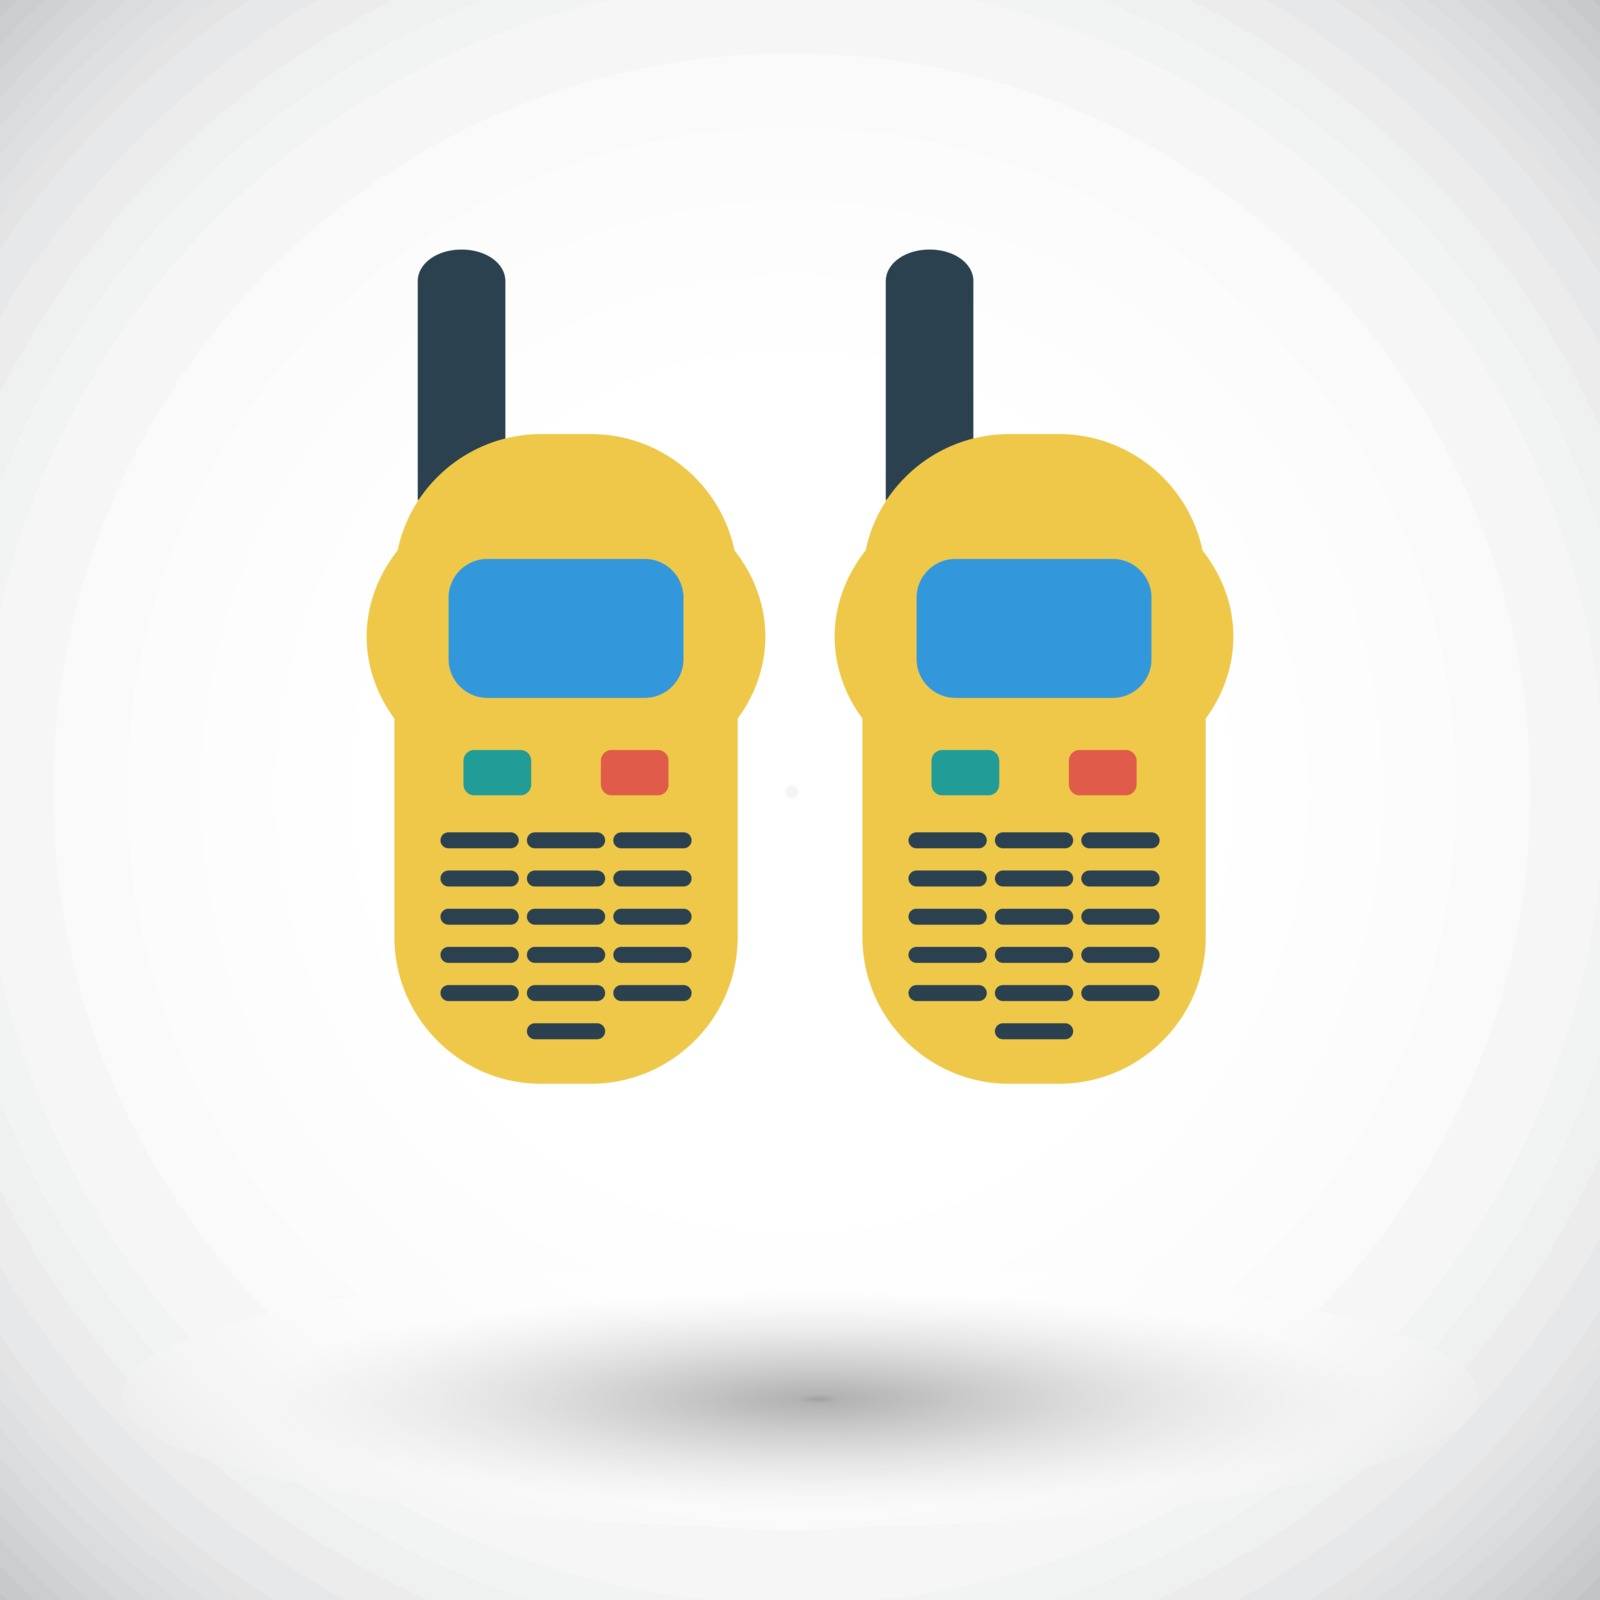 Portable radio. Flat vector icon for mobile and web applications. Vector illustration.